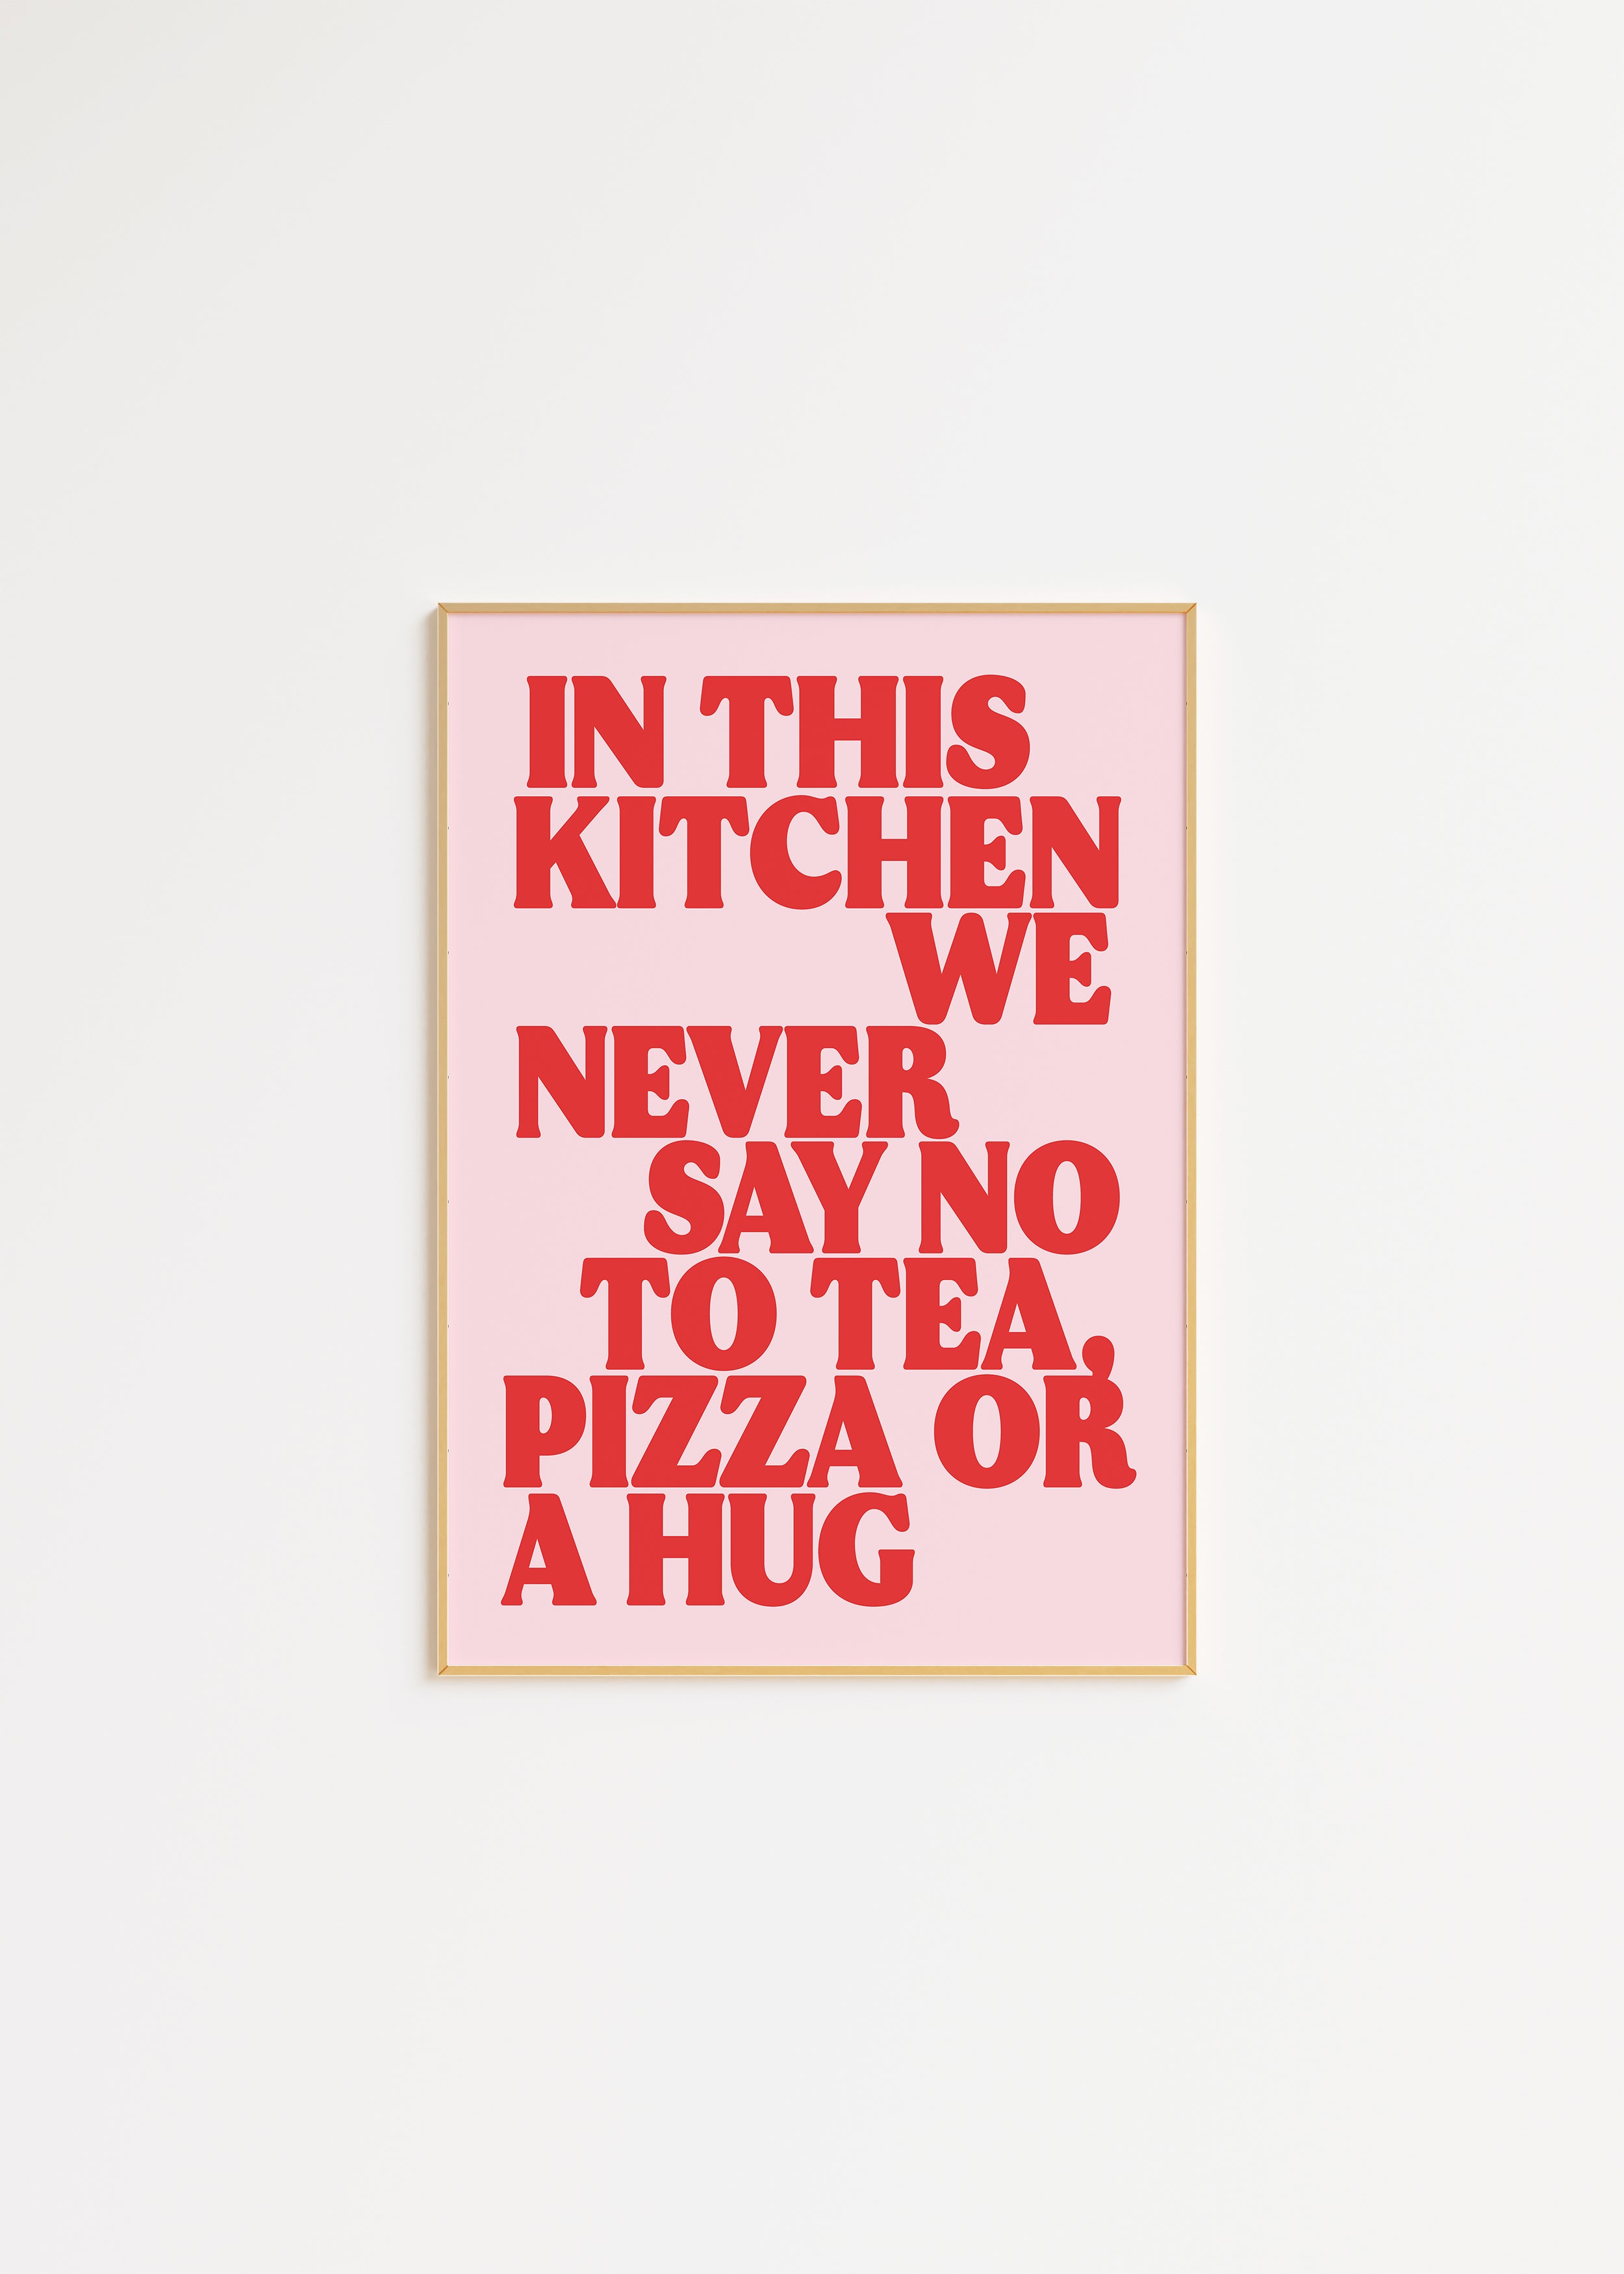 In This Kitchen We Never Say No To Tea, Pizza or a Hug in Red Print A3